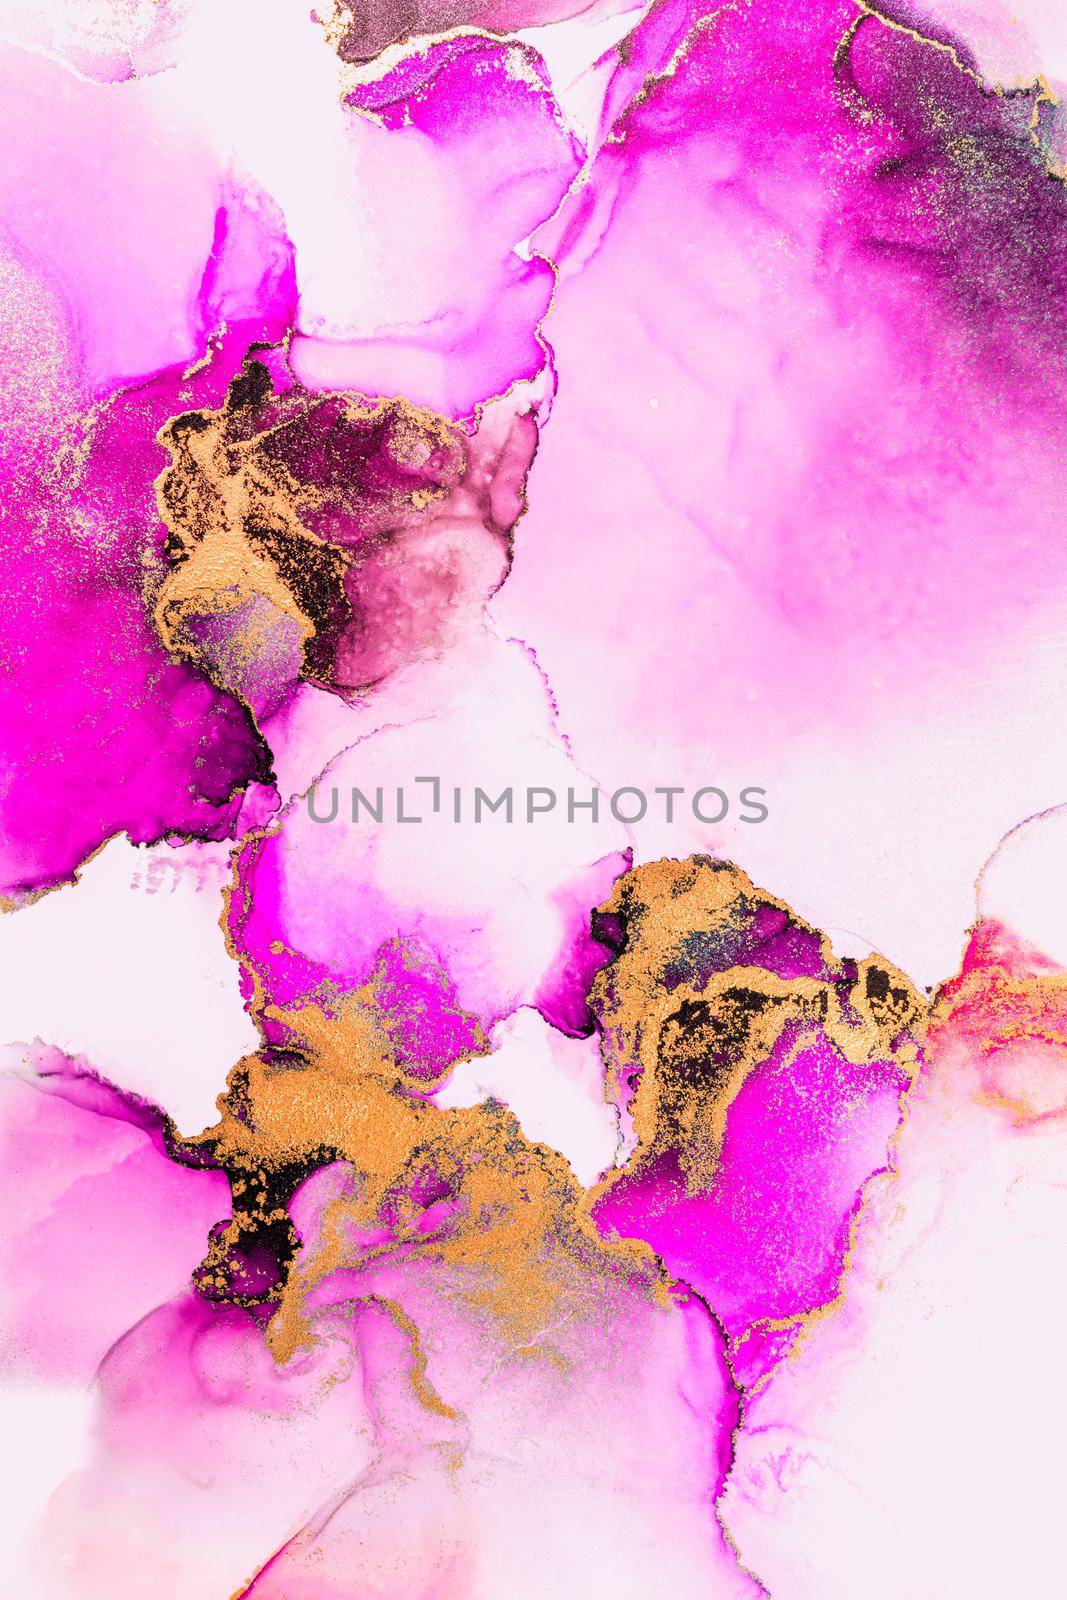 Pink gold abstract background of marble liquid ink art painting on paper . Image of original artwork watercolor alcohol ink paint on high quality paper texture .